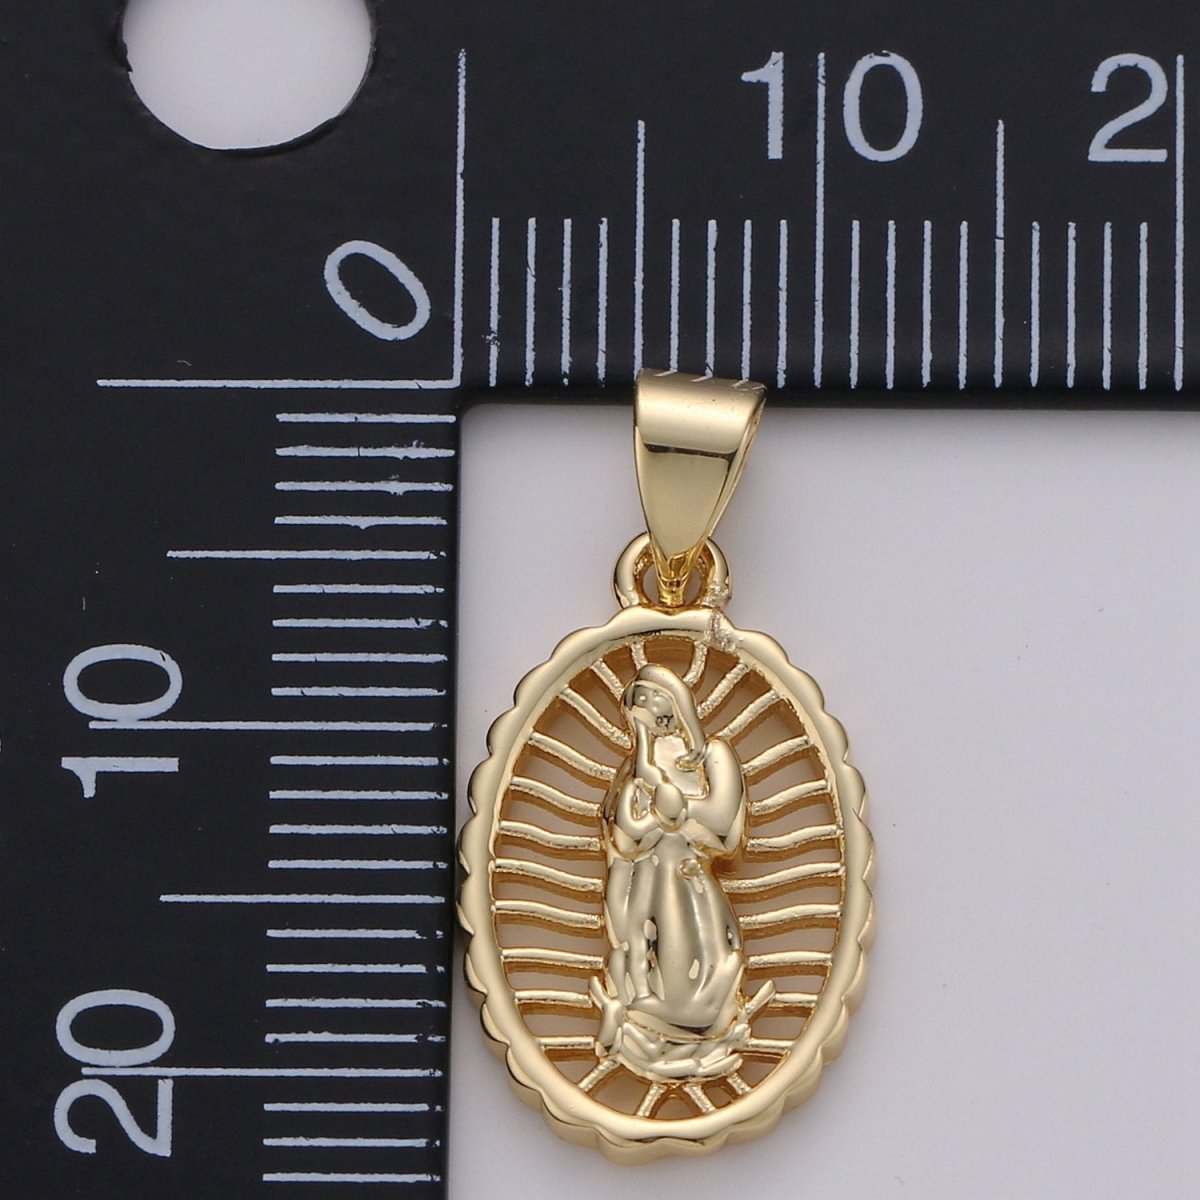 Dainty 24K Gold Filled Virgen de Guadalupe Pendant, Catholic Jewelry, Our Lady of Guadalupe Charm Catholic Religious Jewelry I-801 - DLUXCA